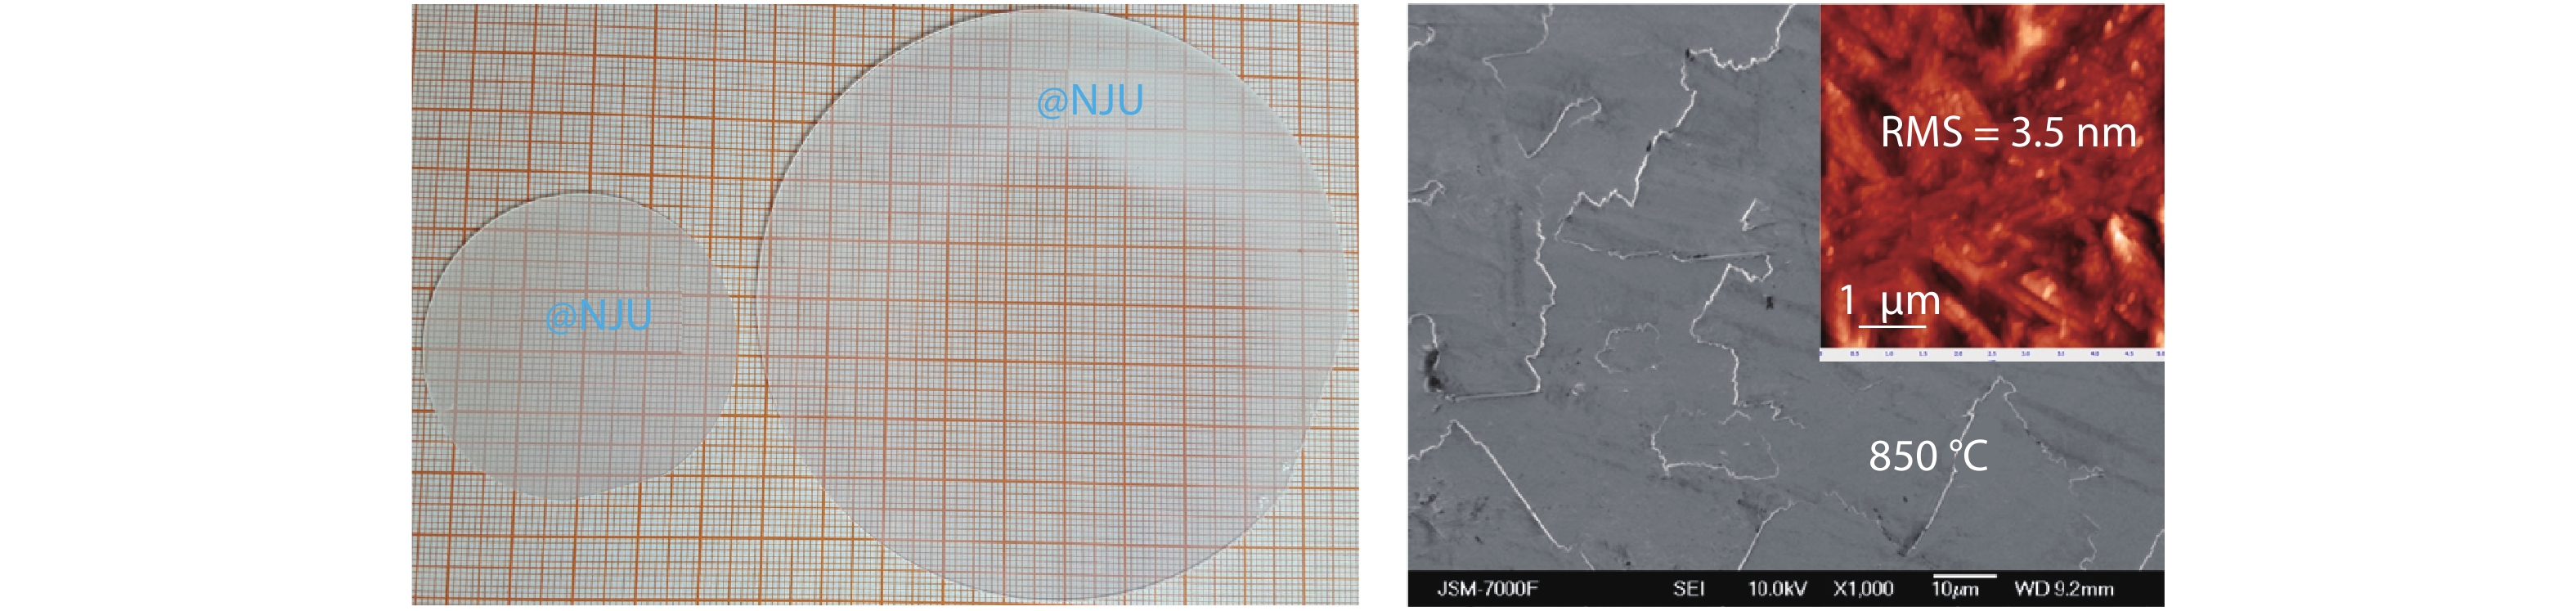 (Color online) Optical photograph (unpublished) and SEM images of HVPE grown β-Ga2O3 at 850 °C.